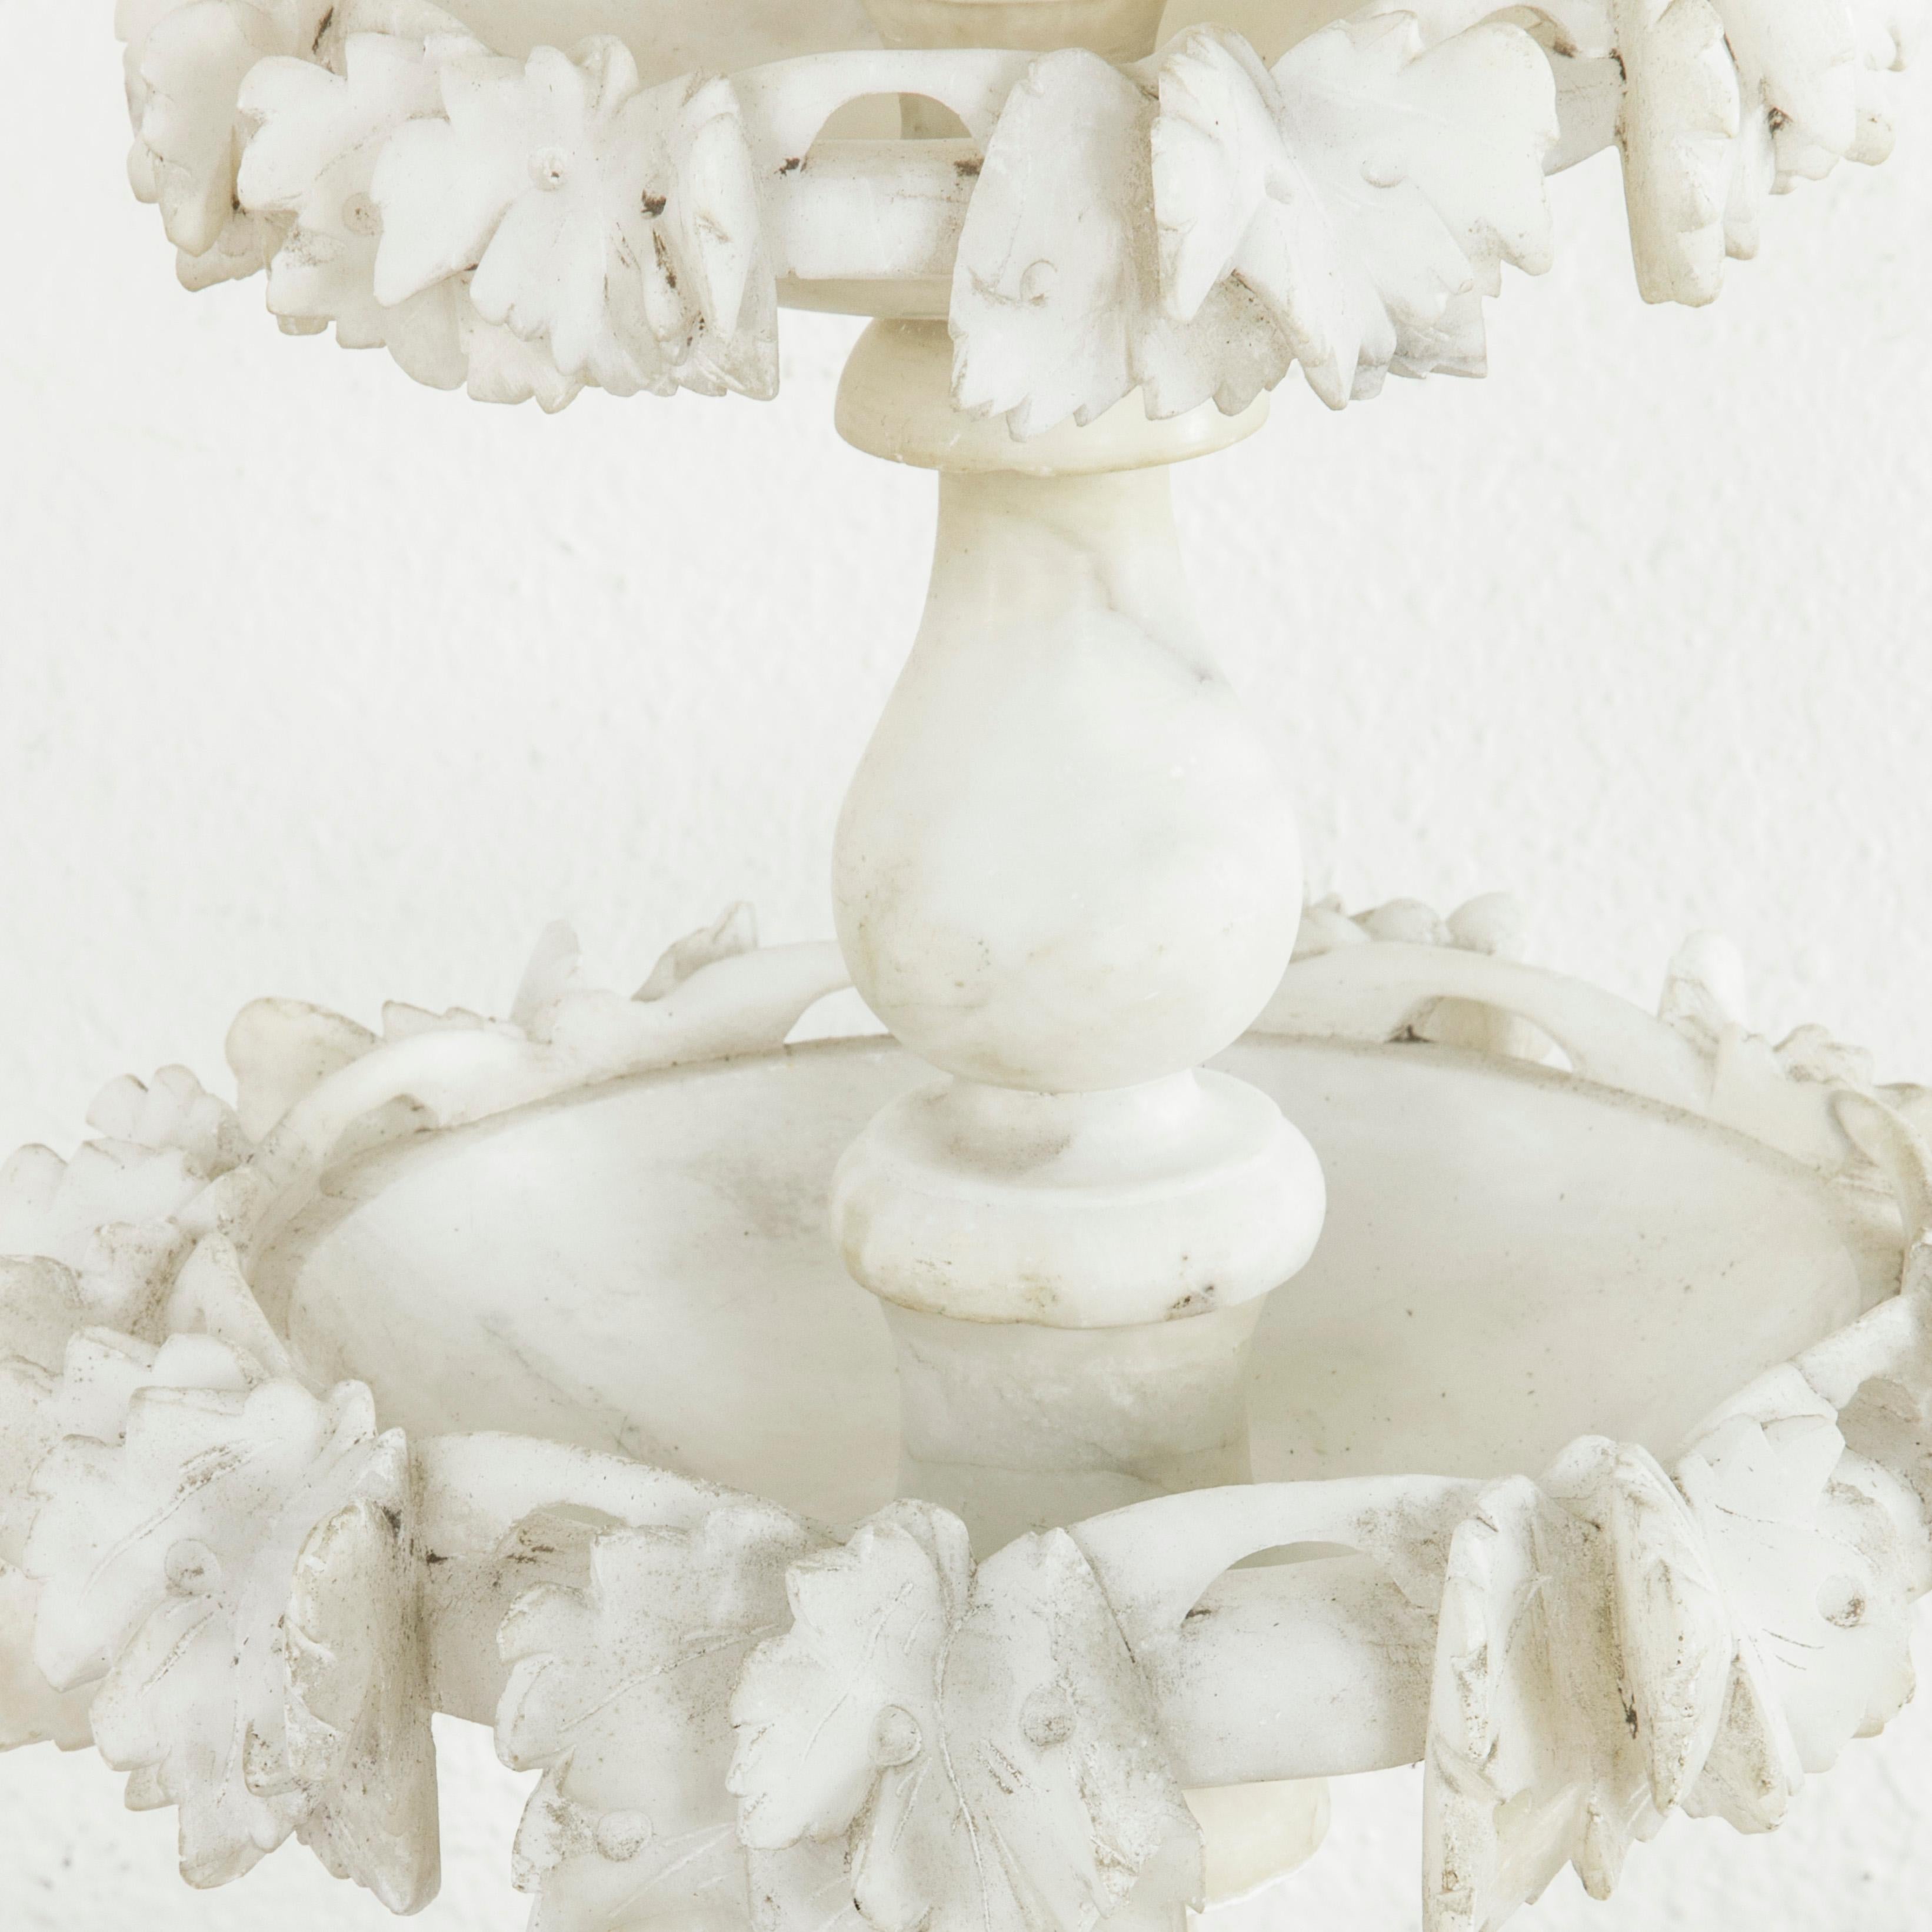 Early 20th Century Large Three-Tiered French Hand-Carved Alabaster Serving Piece with Grapes